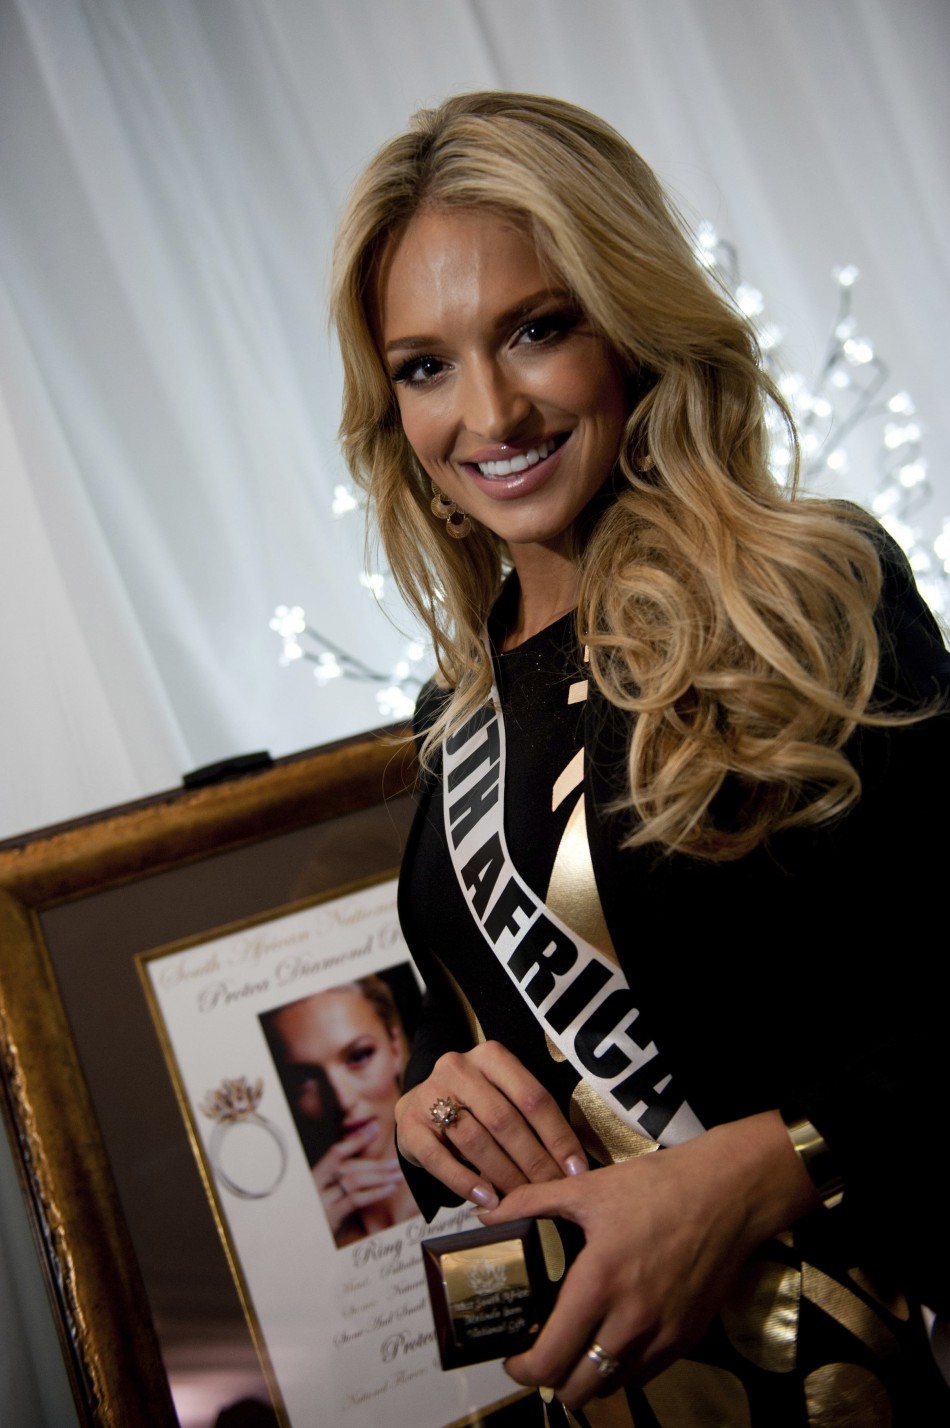 Miss South Africa Bam poses with her gift during the Miss Universe National Gift Auction in Las Vegas